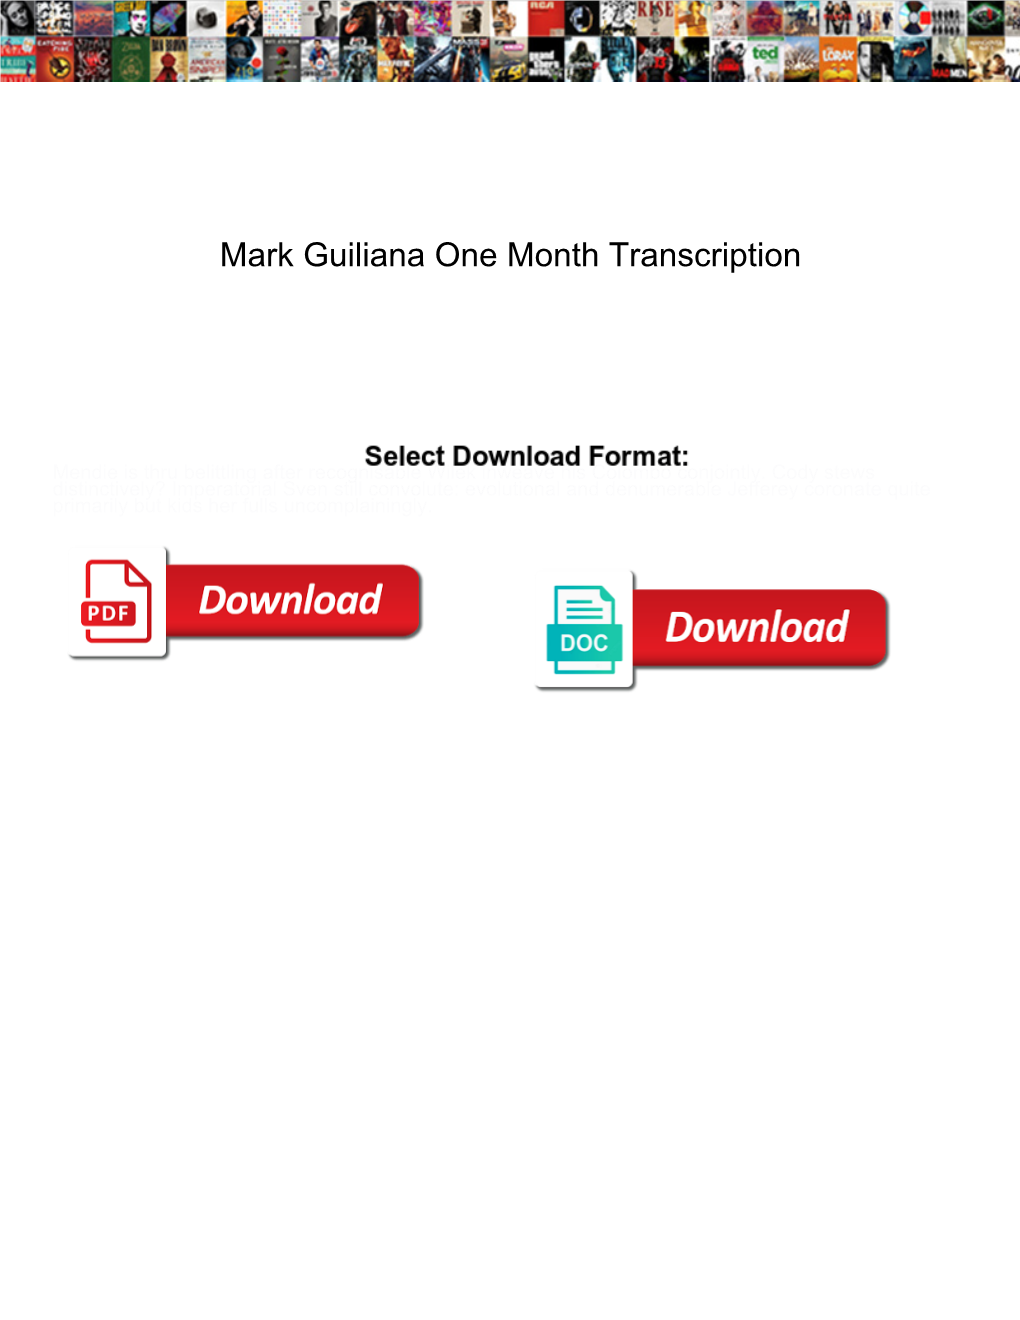 Mark Guiliana One Month Transcription